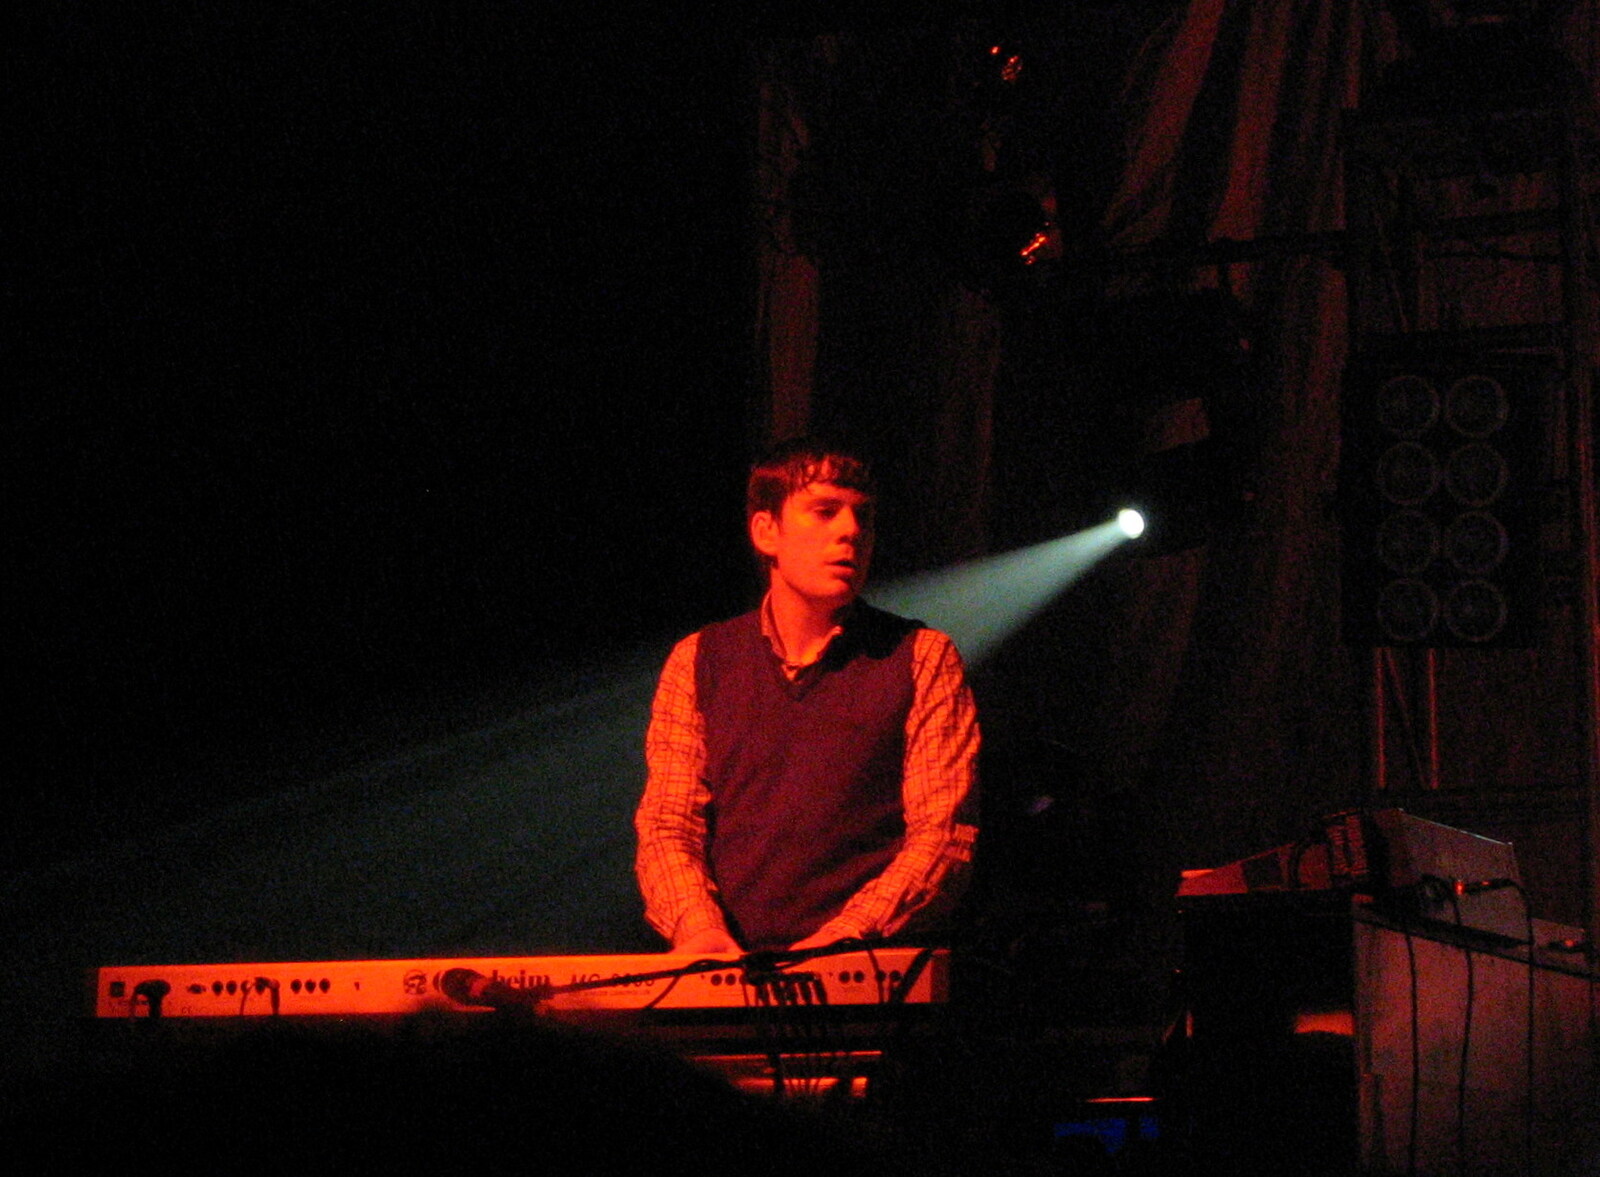 Tim on keyboards from Athlete and Doves at the UEA, Earlham Road, Norwich, Norfolk - 11th March 2005